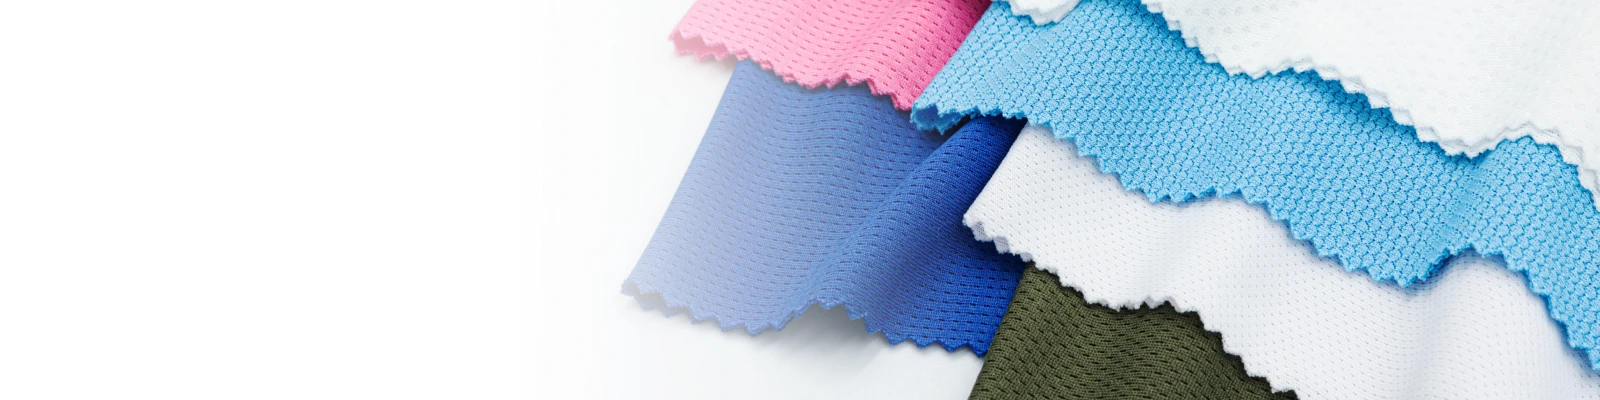 Mesh Fabric : Breathable Textiles Redefining Comfort